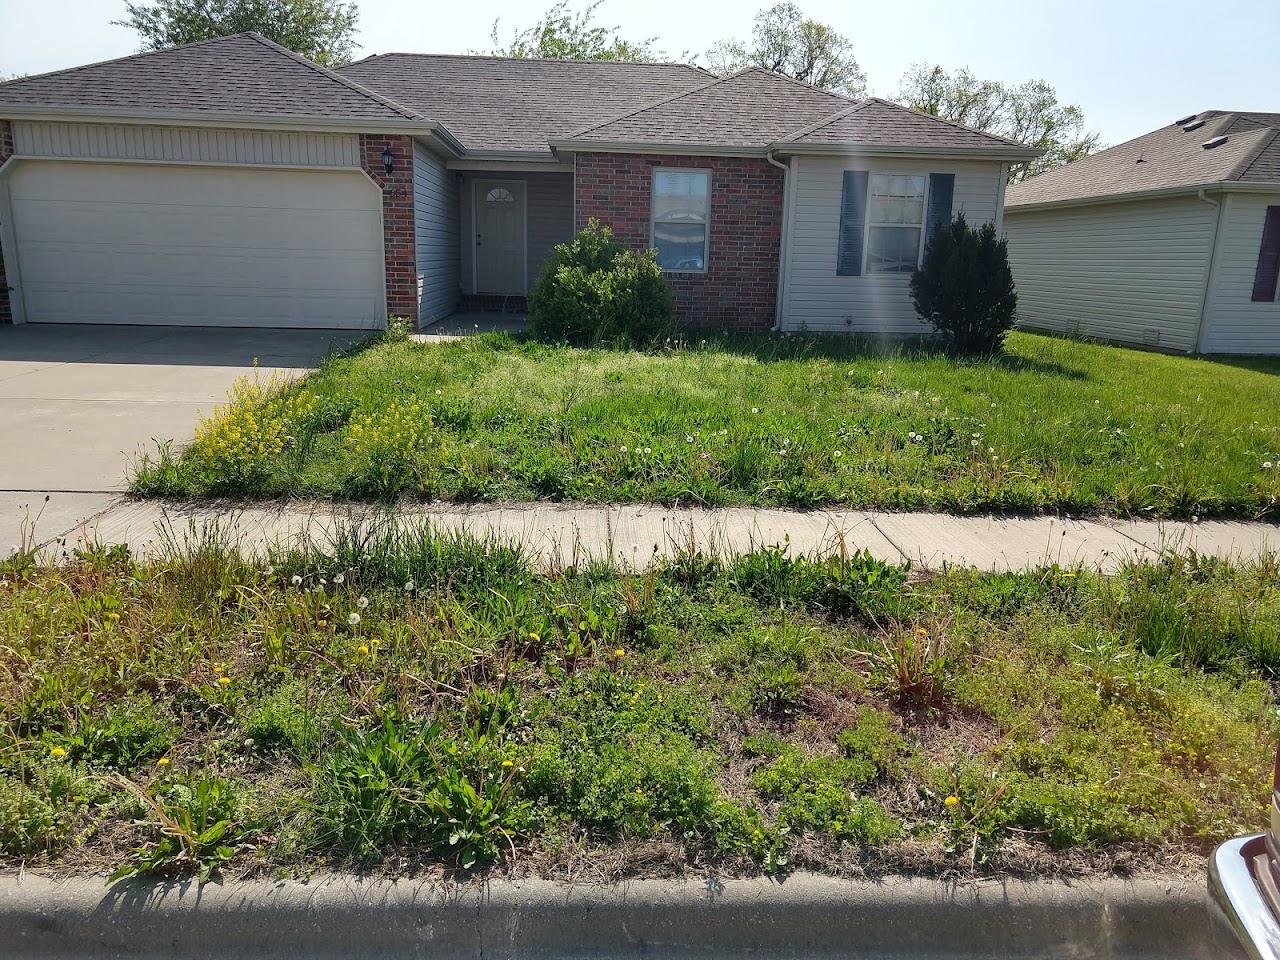 Photo of JACOB'S LANDING. Affordable housing located at 647 S HAZELNUT AVE SPRINGFIELD, MO 65802